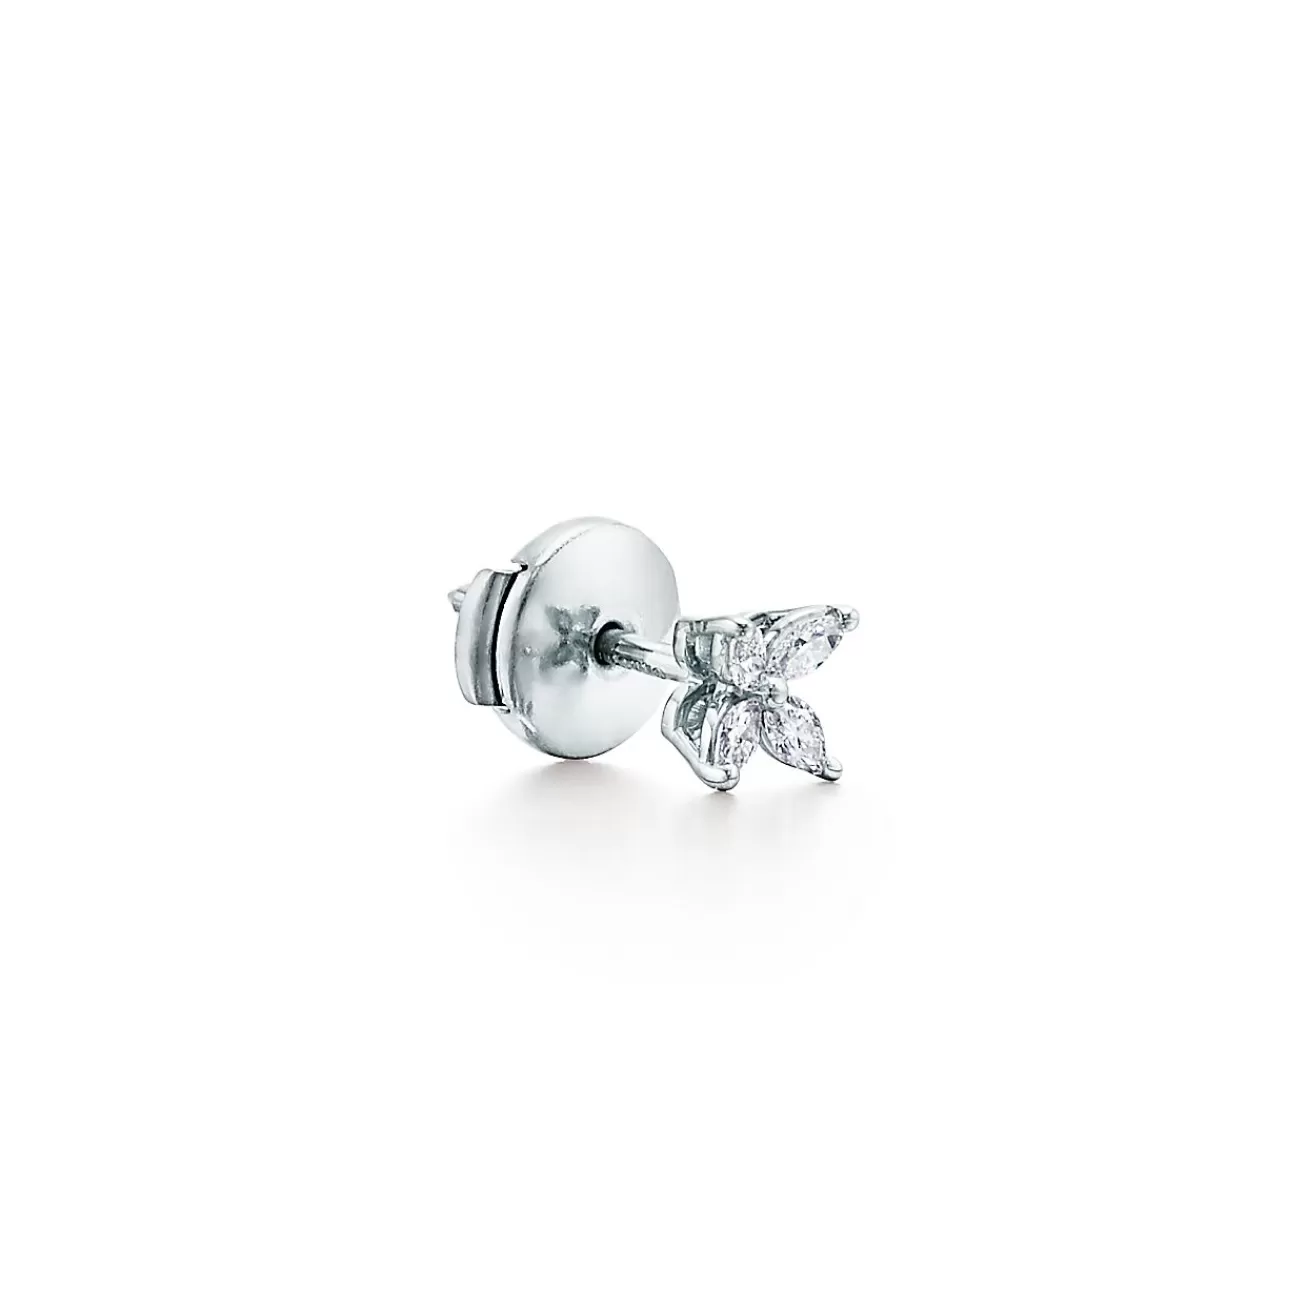 Tiffany & Co. Tiffany Victoria® earrings in platinum with diamonds, mini. | ^ Earrings | Gifts for Her